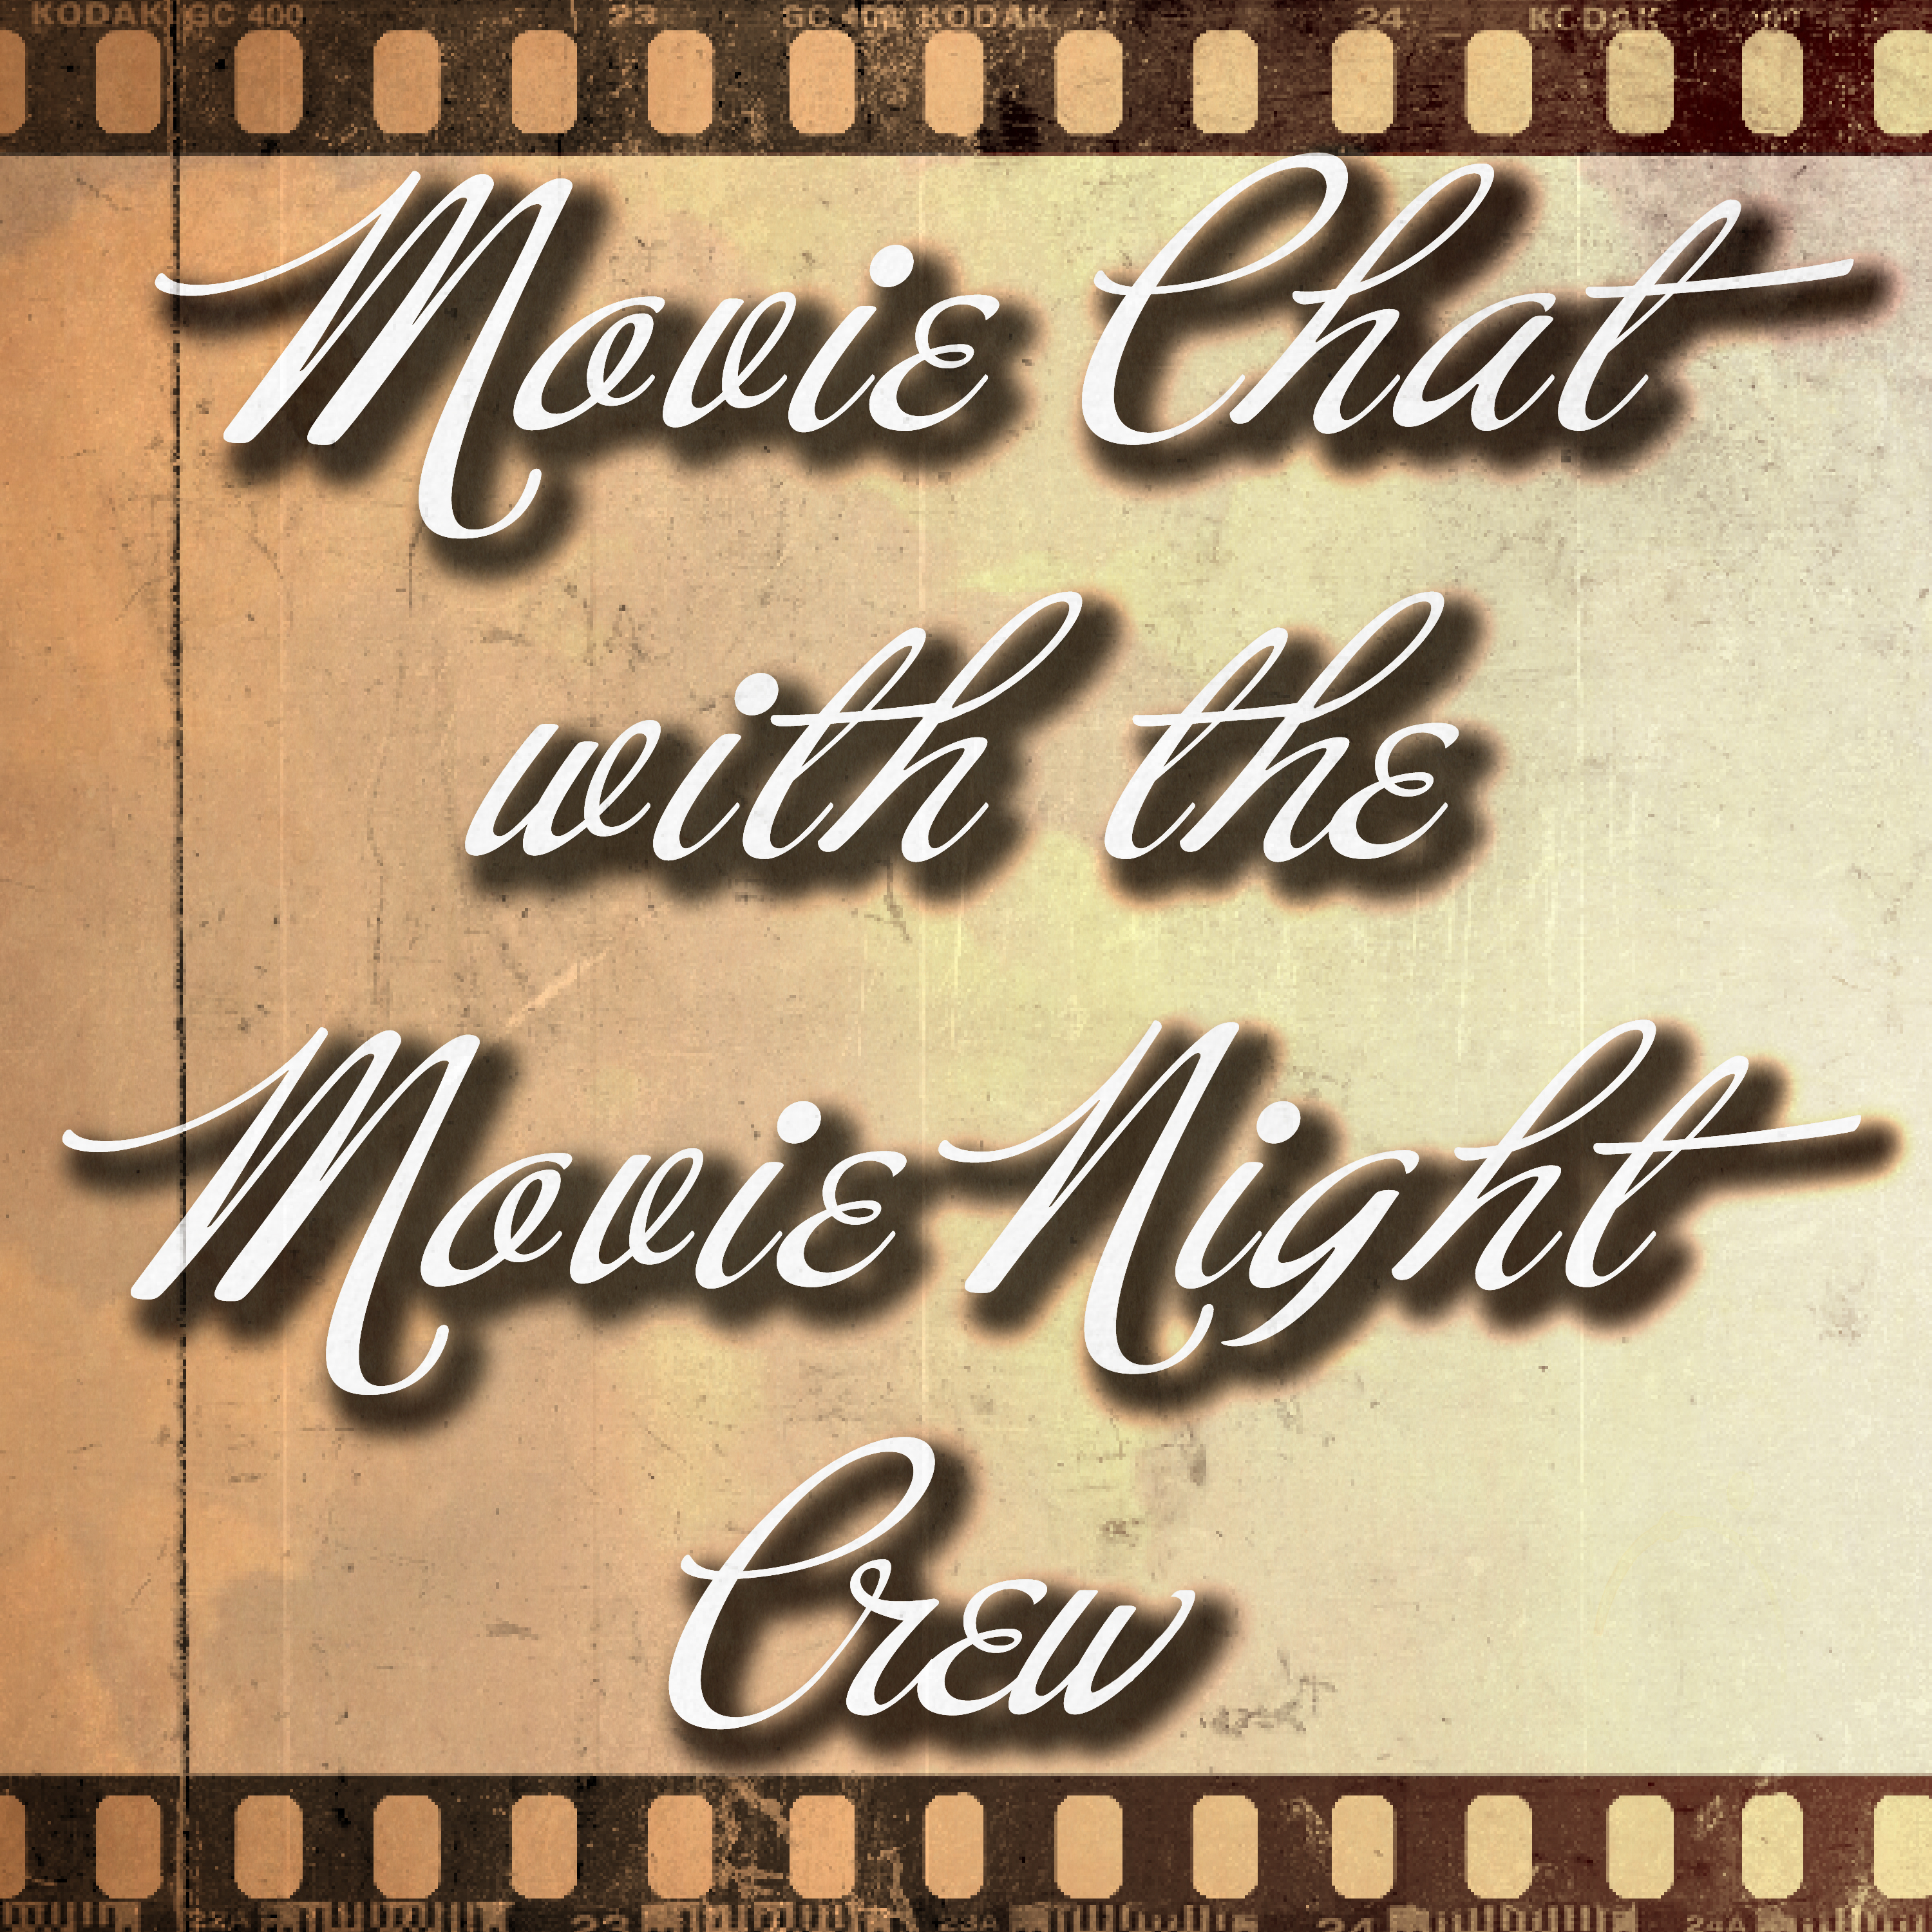 Movie Chat with the Movie Night Crew